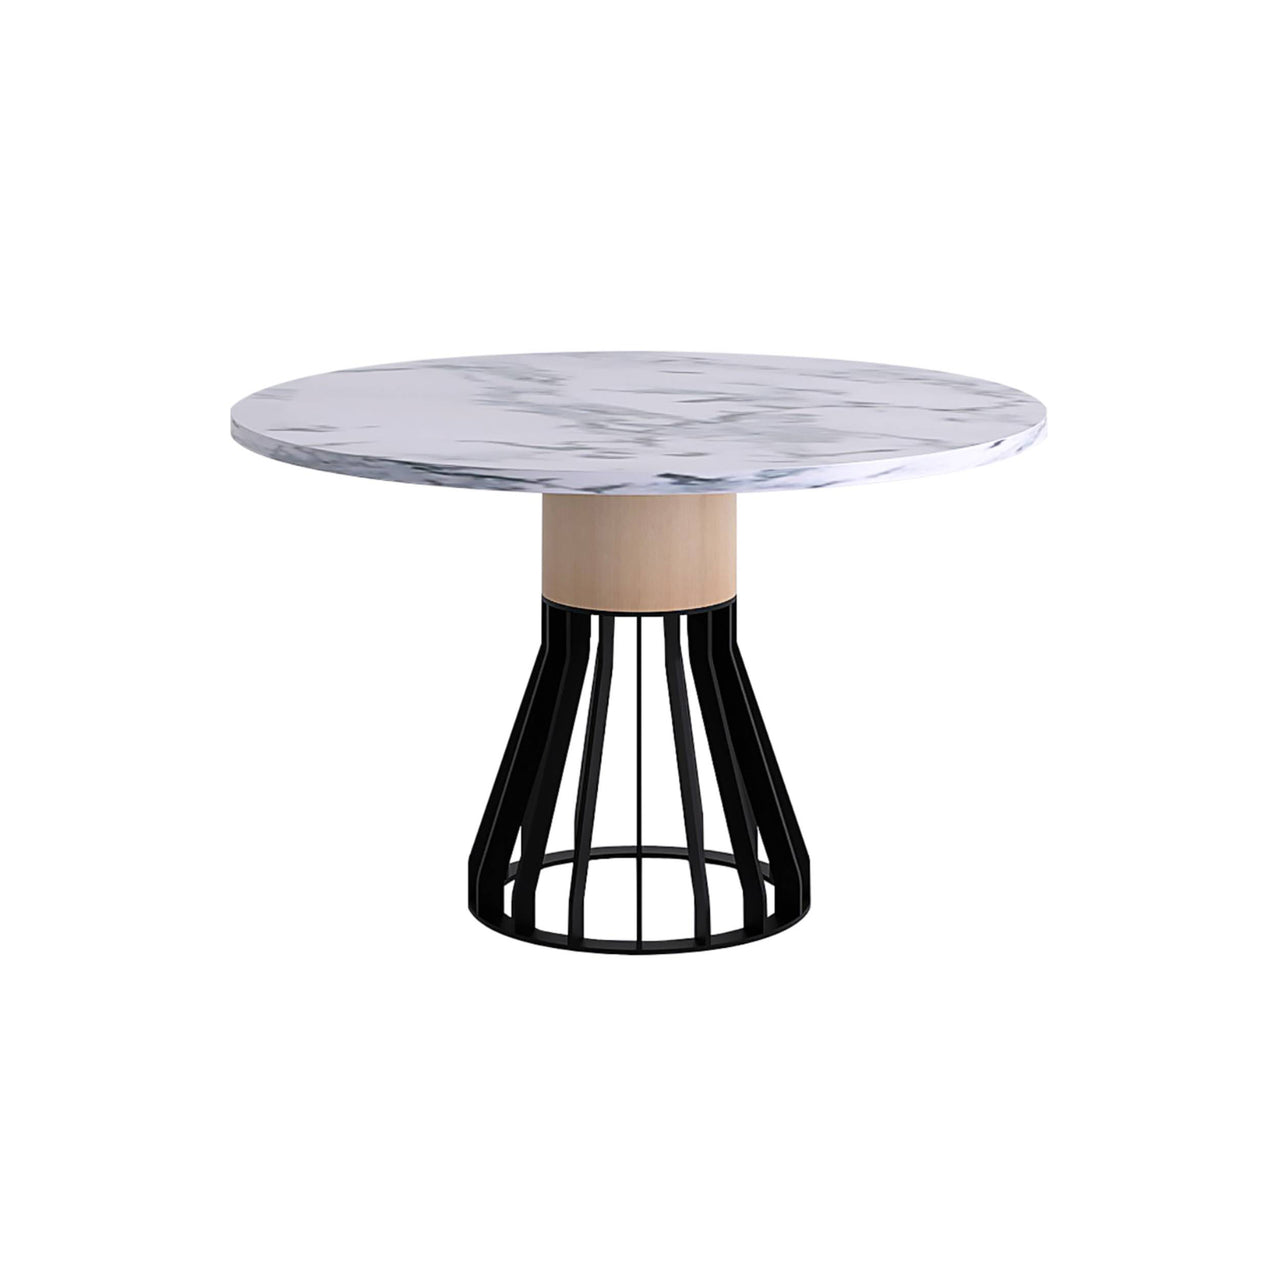 Mewoma Round Dining Table: Small - 47.2